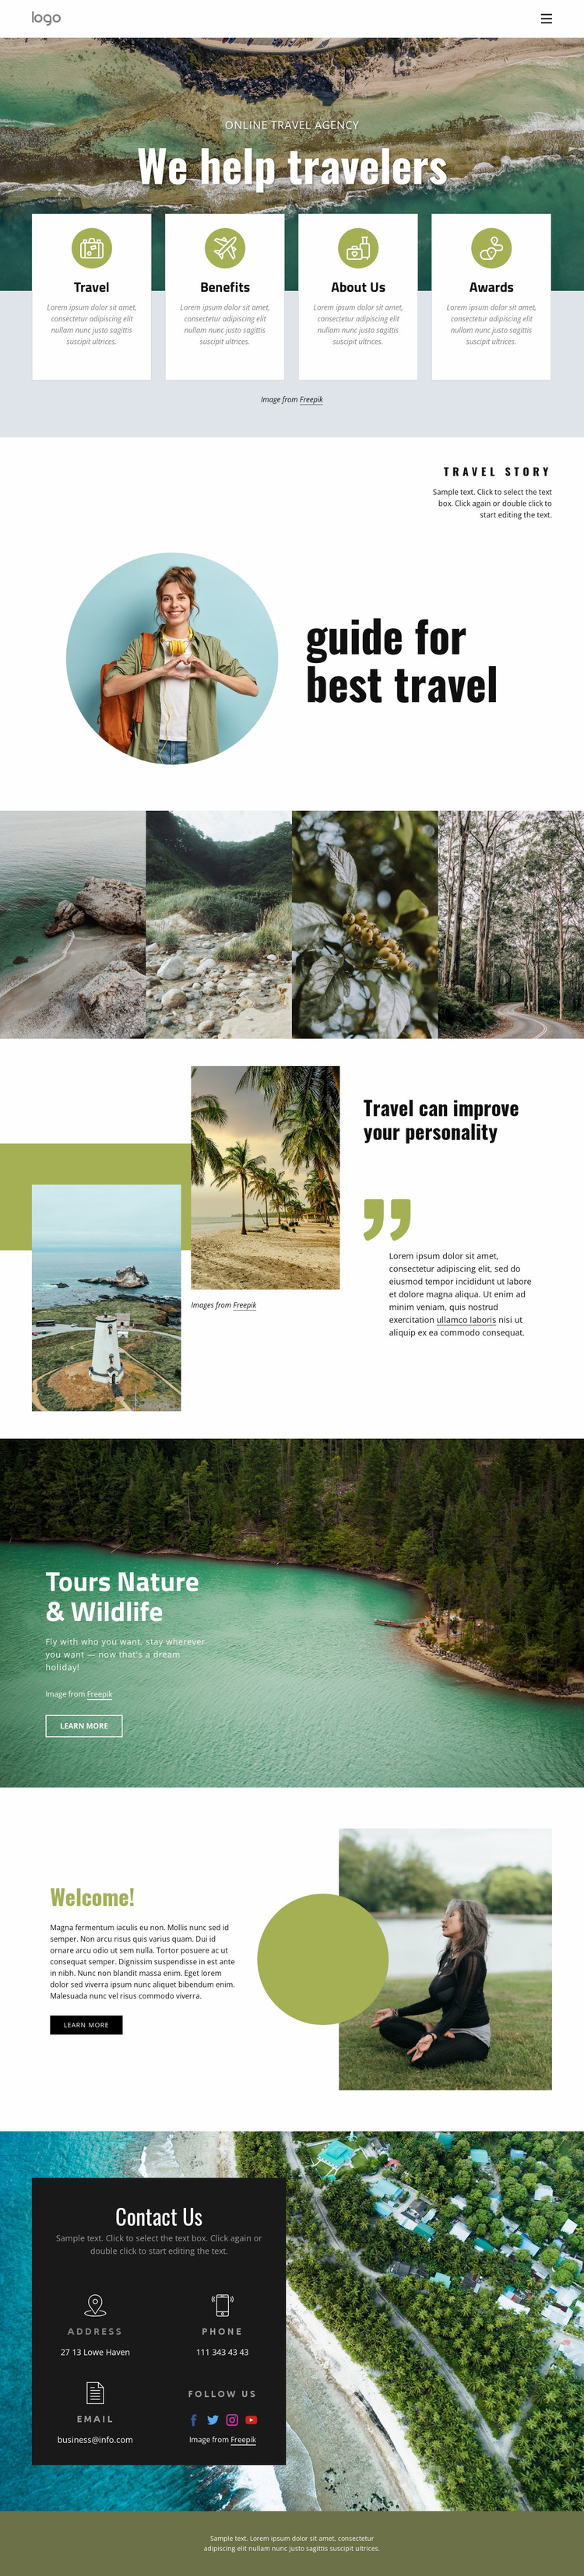 We help manage your trip Landing Page